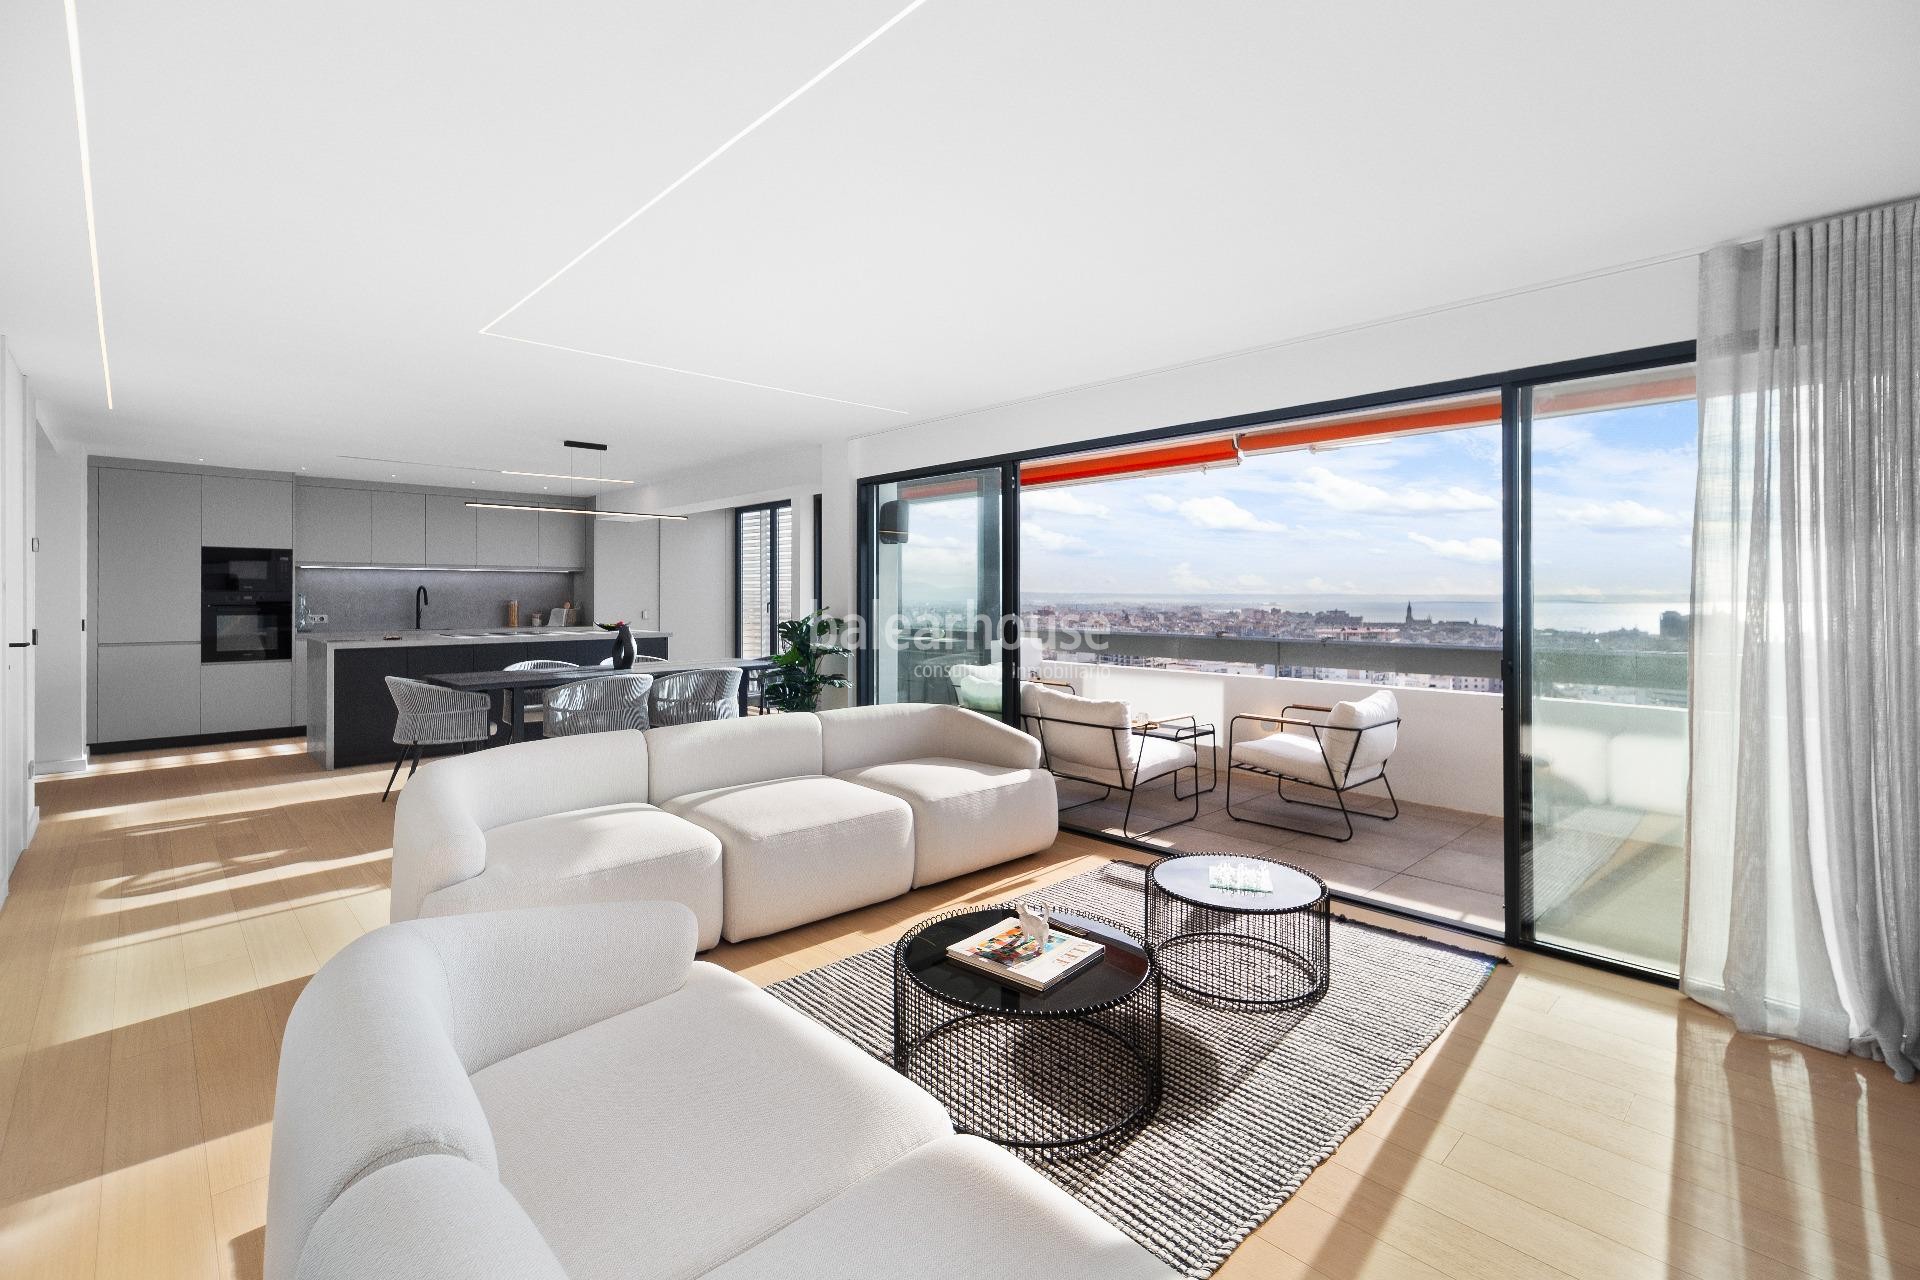 Stunning refurbished apartment spectacular views of the city and the sea.